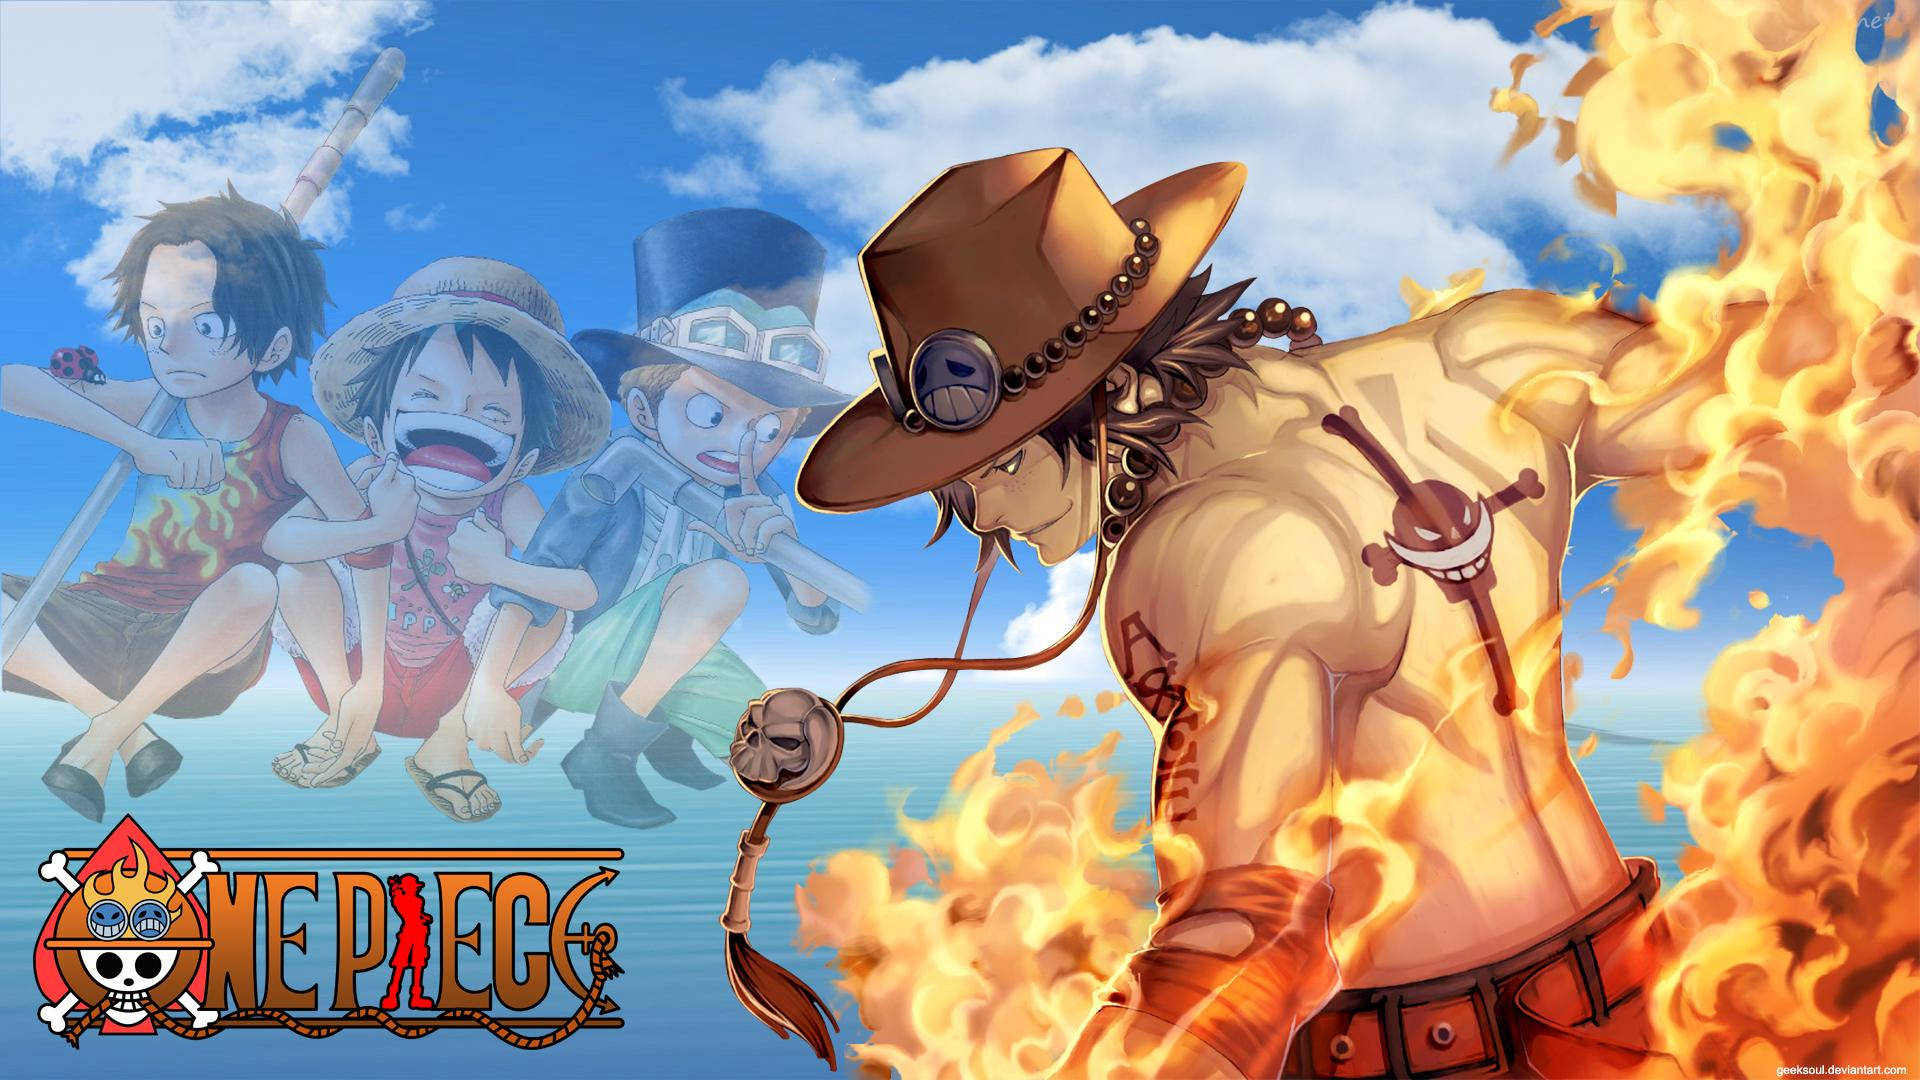 https://wallpapers.com/images/hd/one-piece-ace-ocean-poster-abs4e9g32lmce5me.jpg